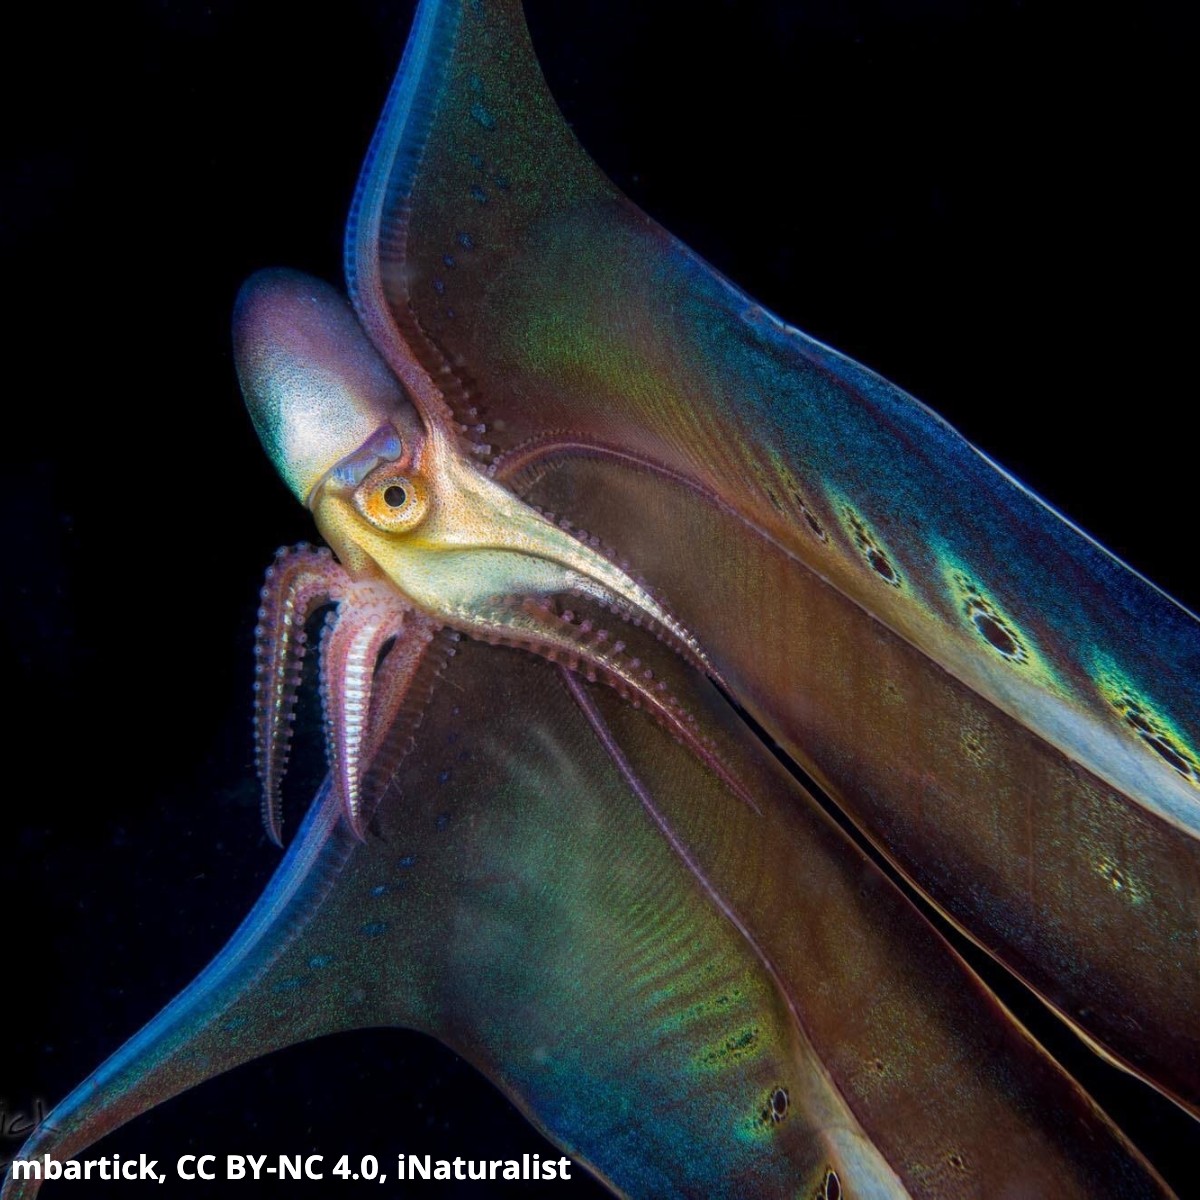 Meet the Indo-Pacific violet blanket octopus! Females grow up to 6 ft (2 m) long—and are more than 10,000x larger than males. They also sport massive “blankets,” or webs of skin connecting their dorsal arms, that they can detach to distract predators.